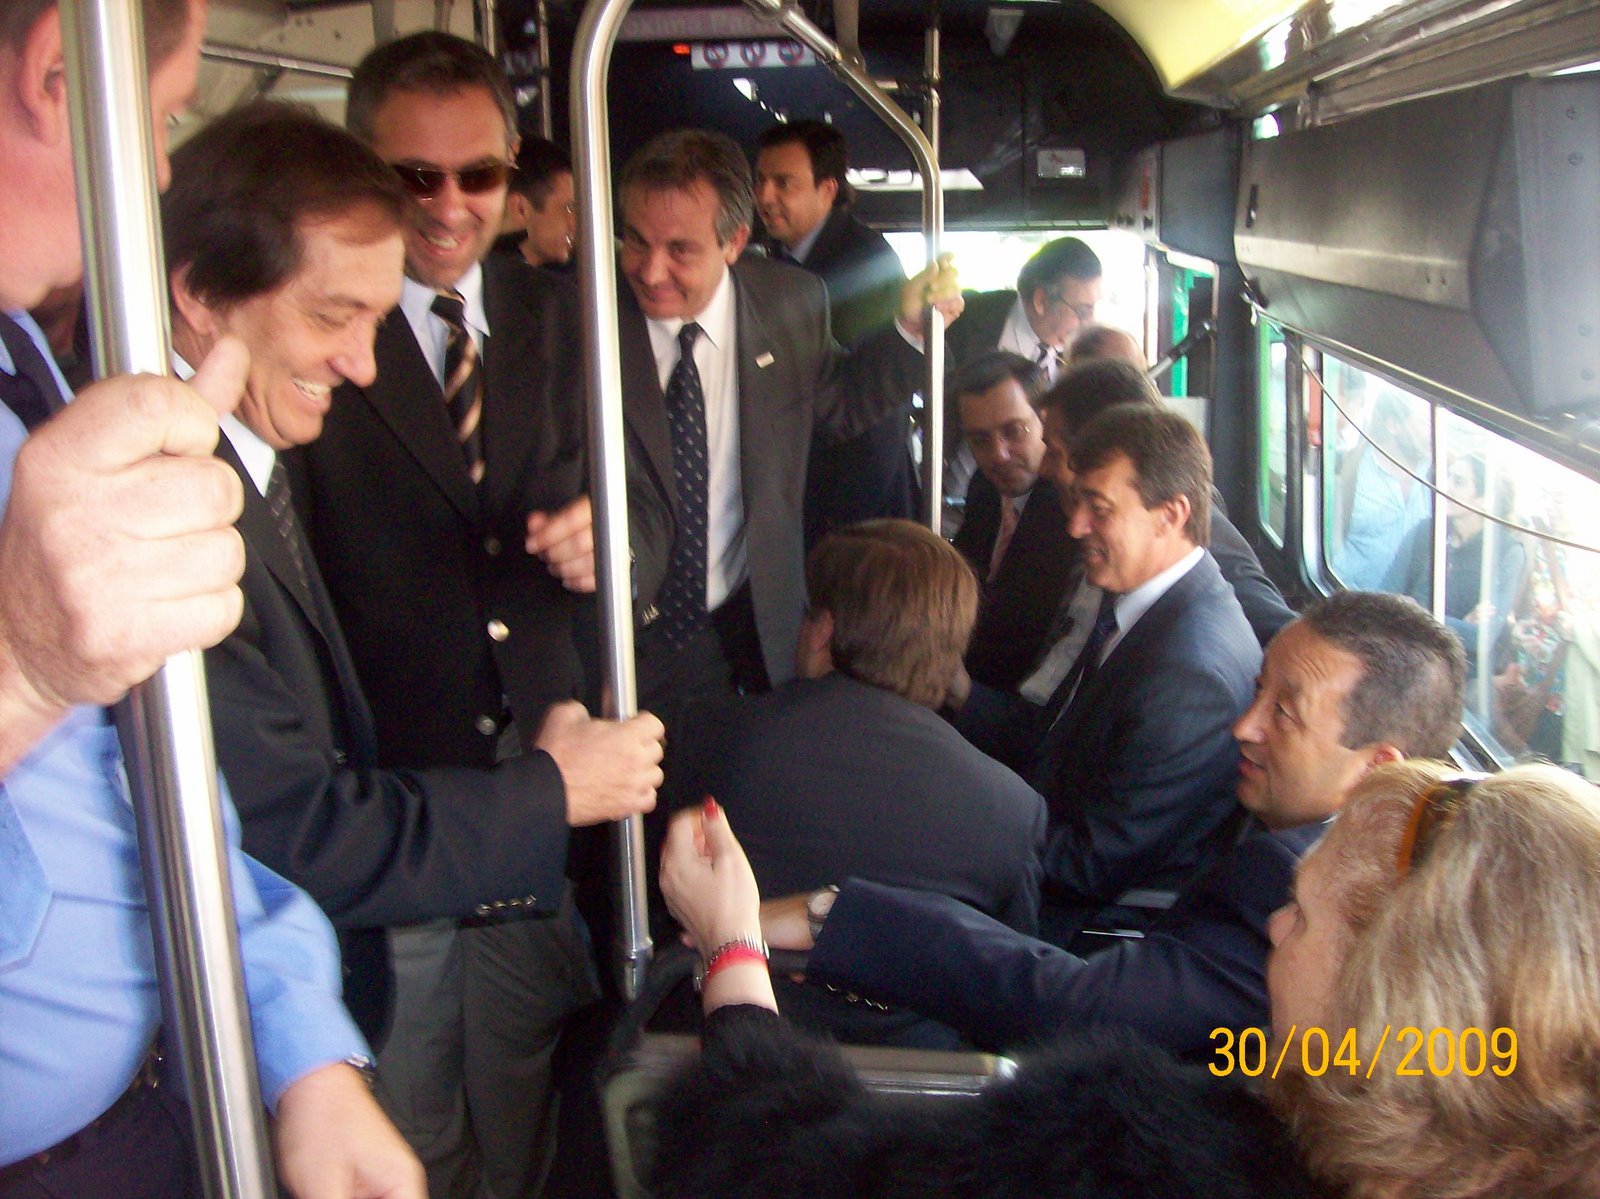 The governor and his officials in the first official trip to the Flyer. Photo by Jorge Luis Guevara.